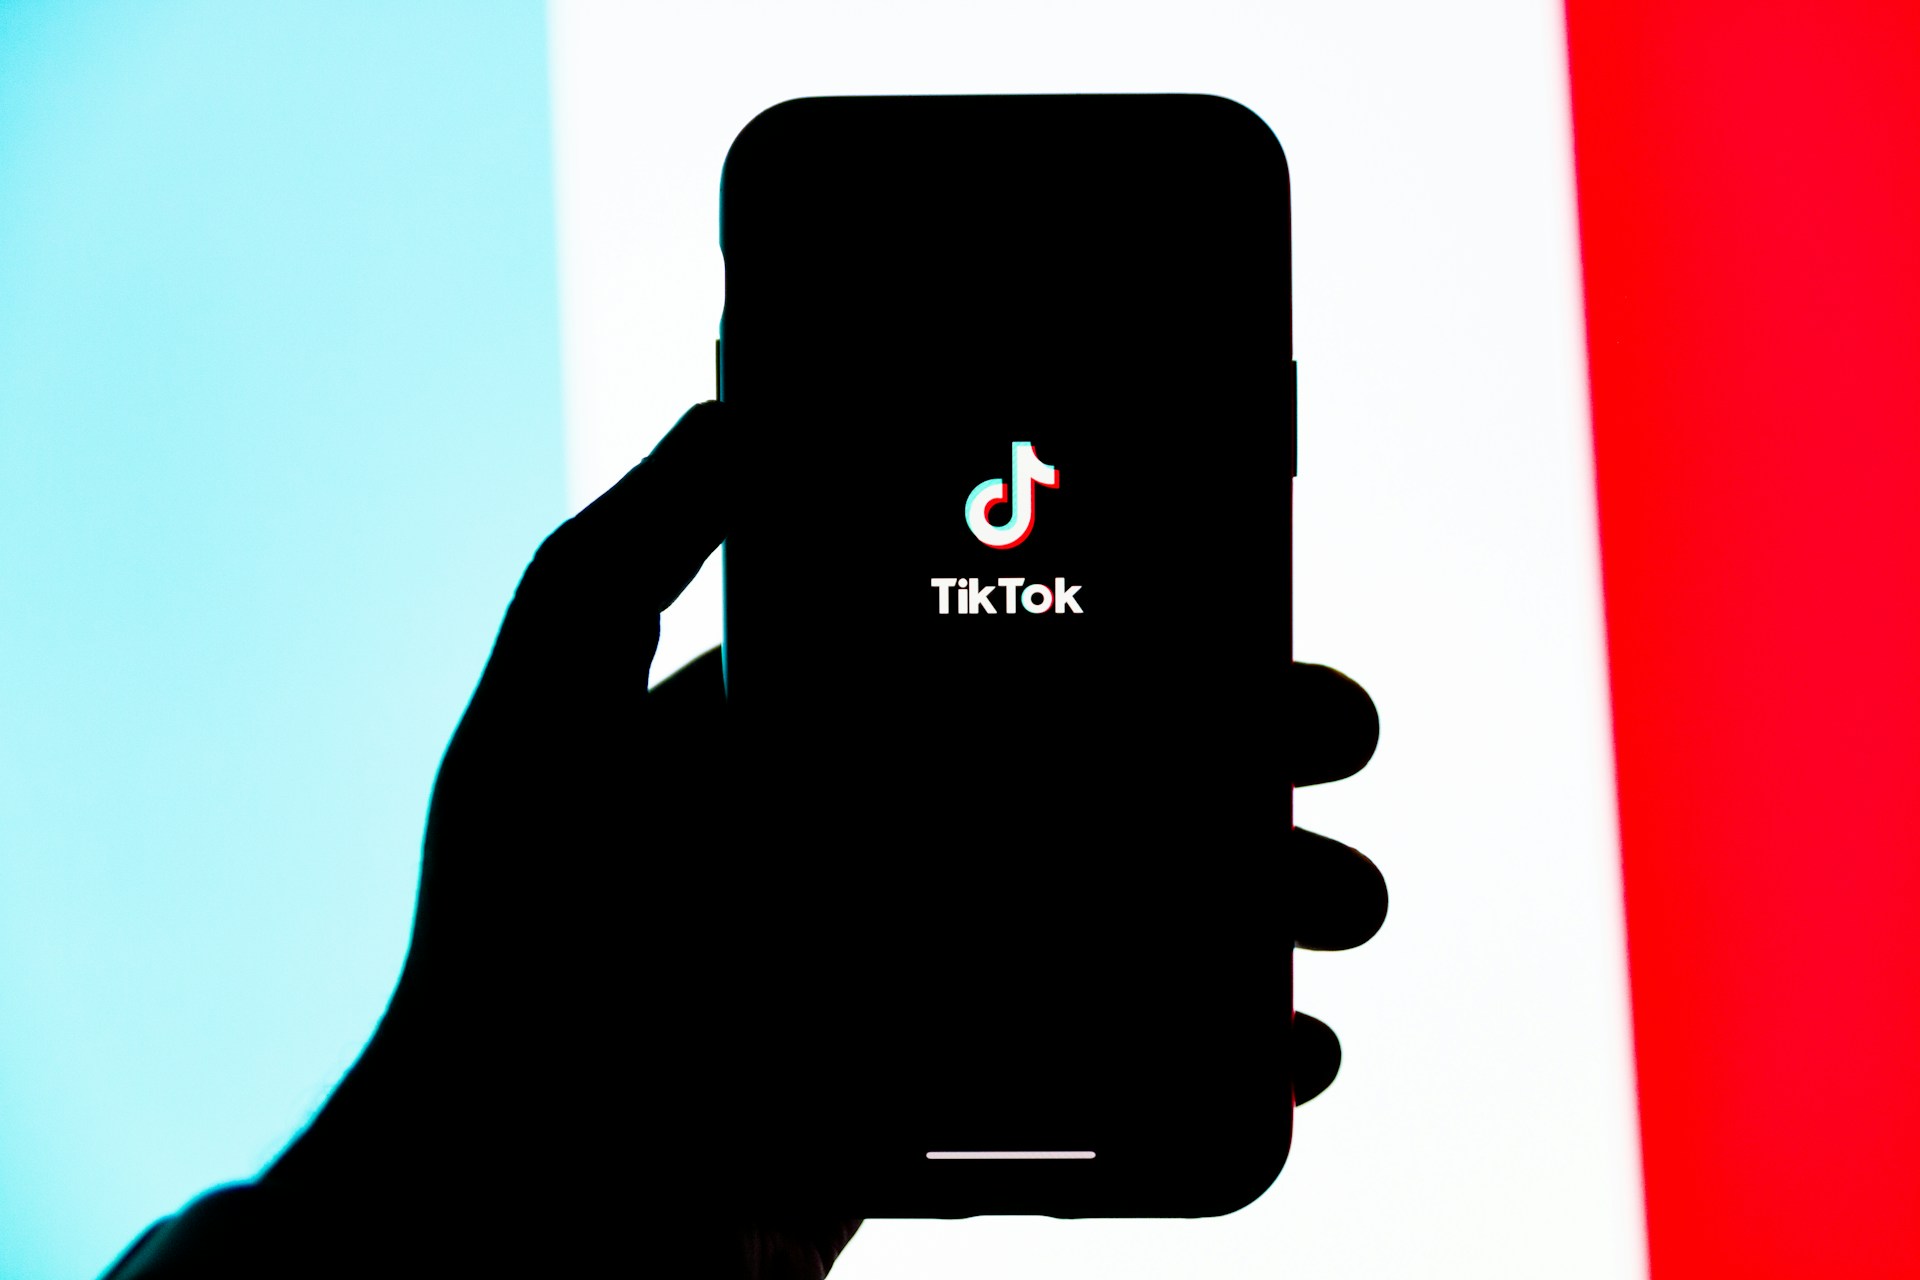 The real problem with TikTok is not China, the problem is TikTok’s data collection practices and lack of user privacy.